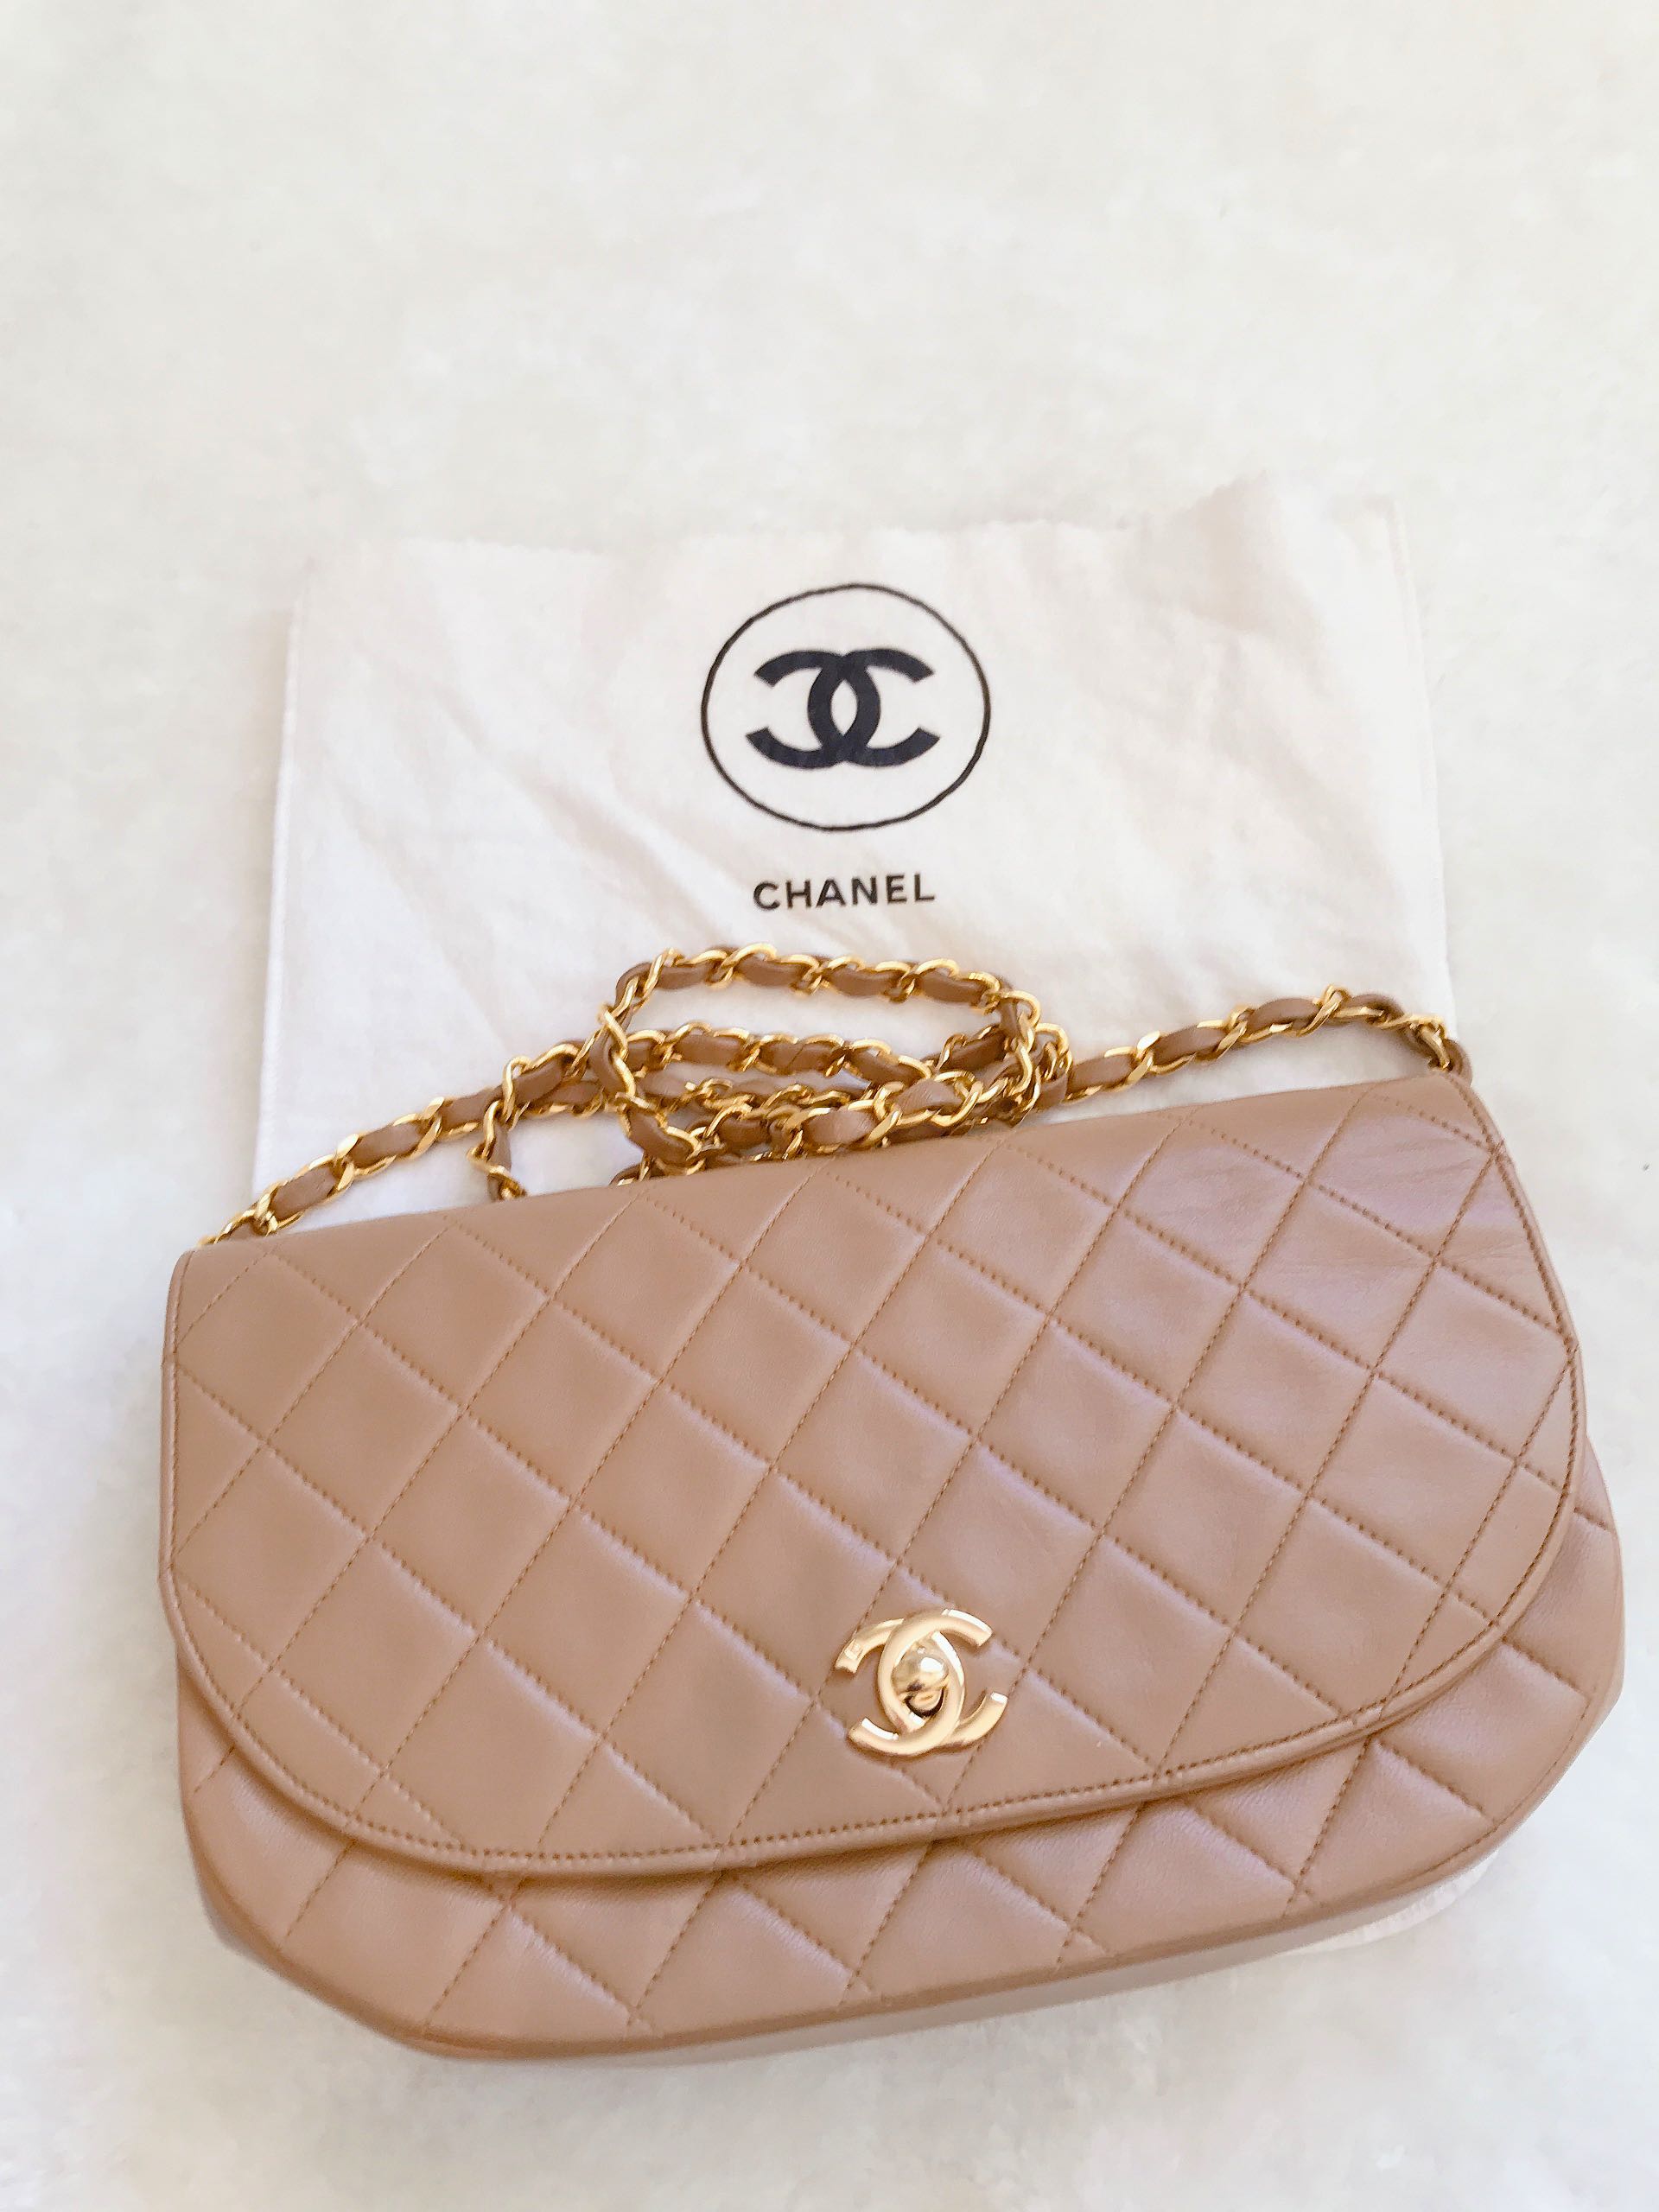 Nows Your Chance to Score a Vintage Chanel Bag On Sale BTW